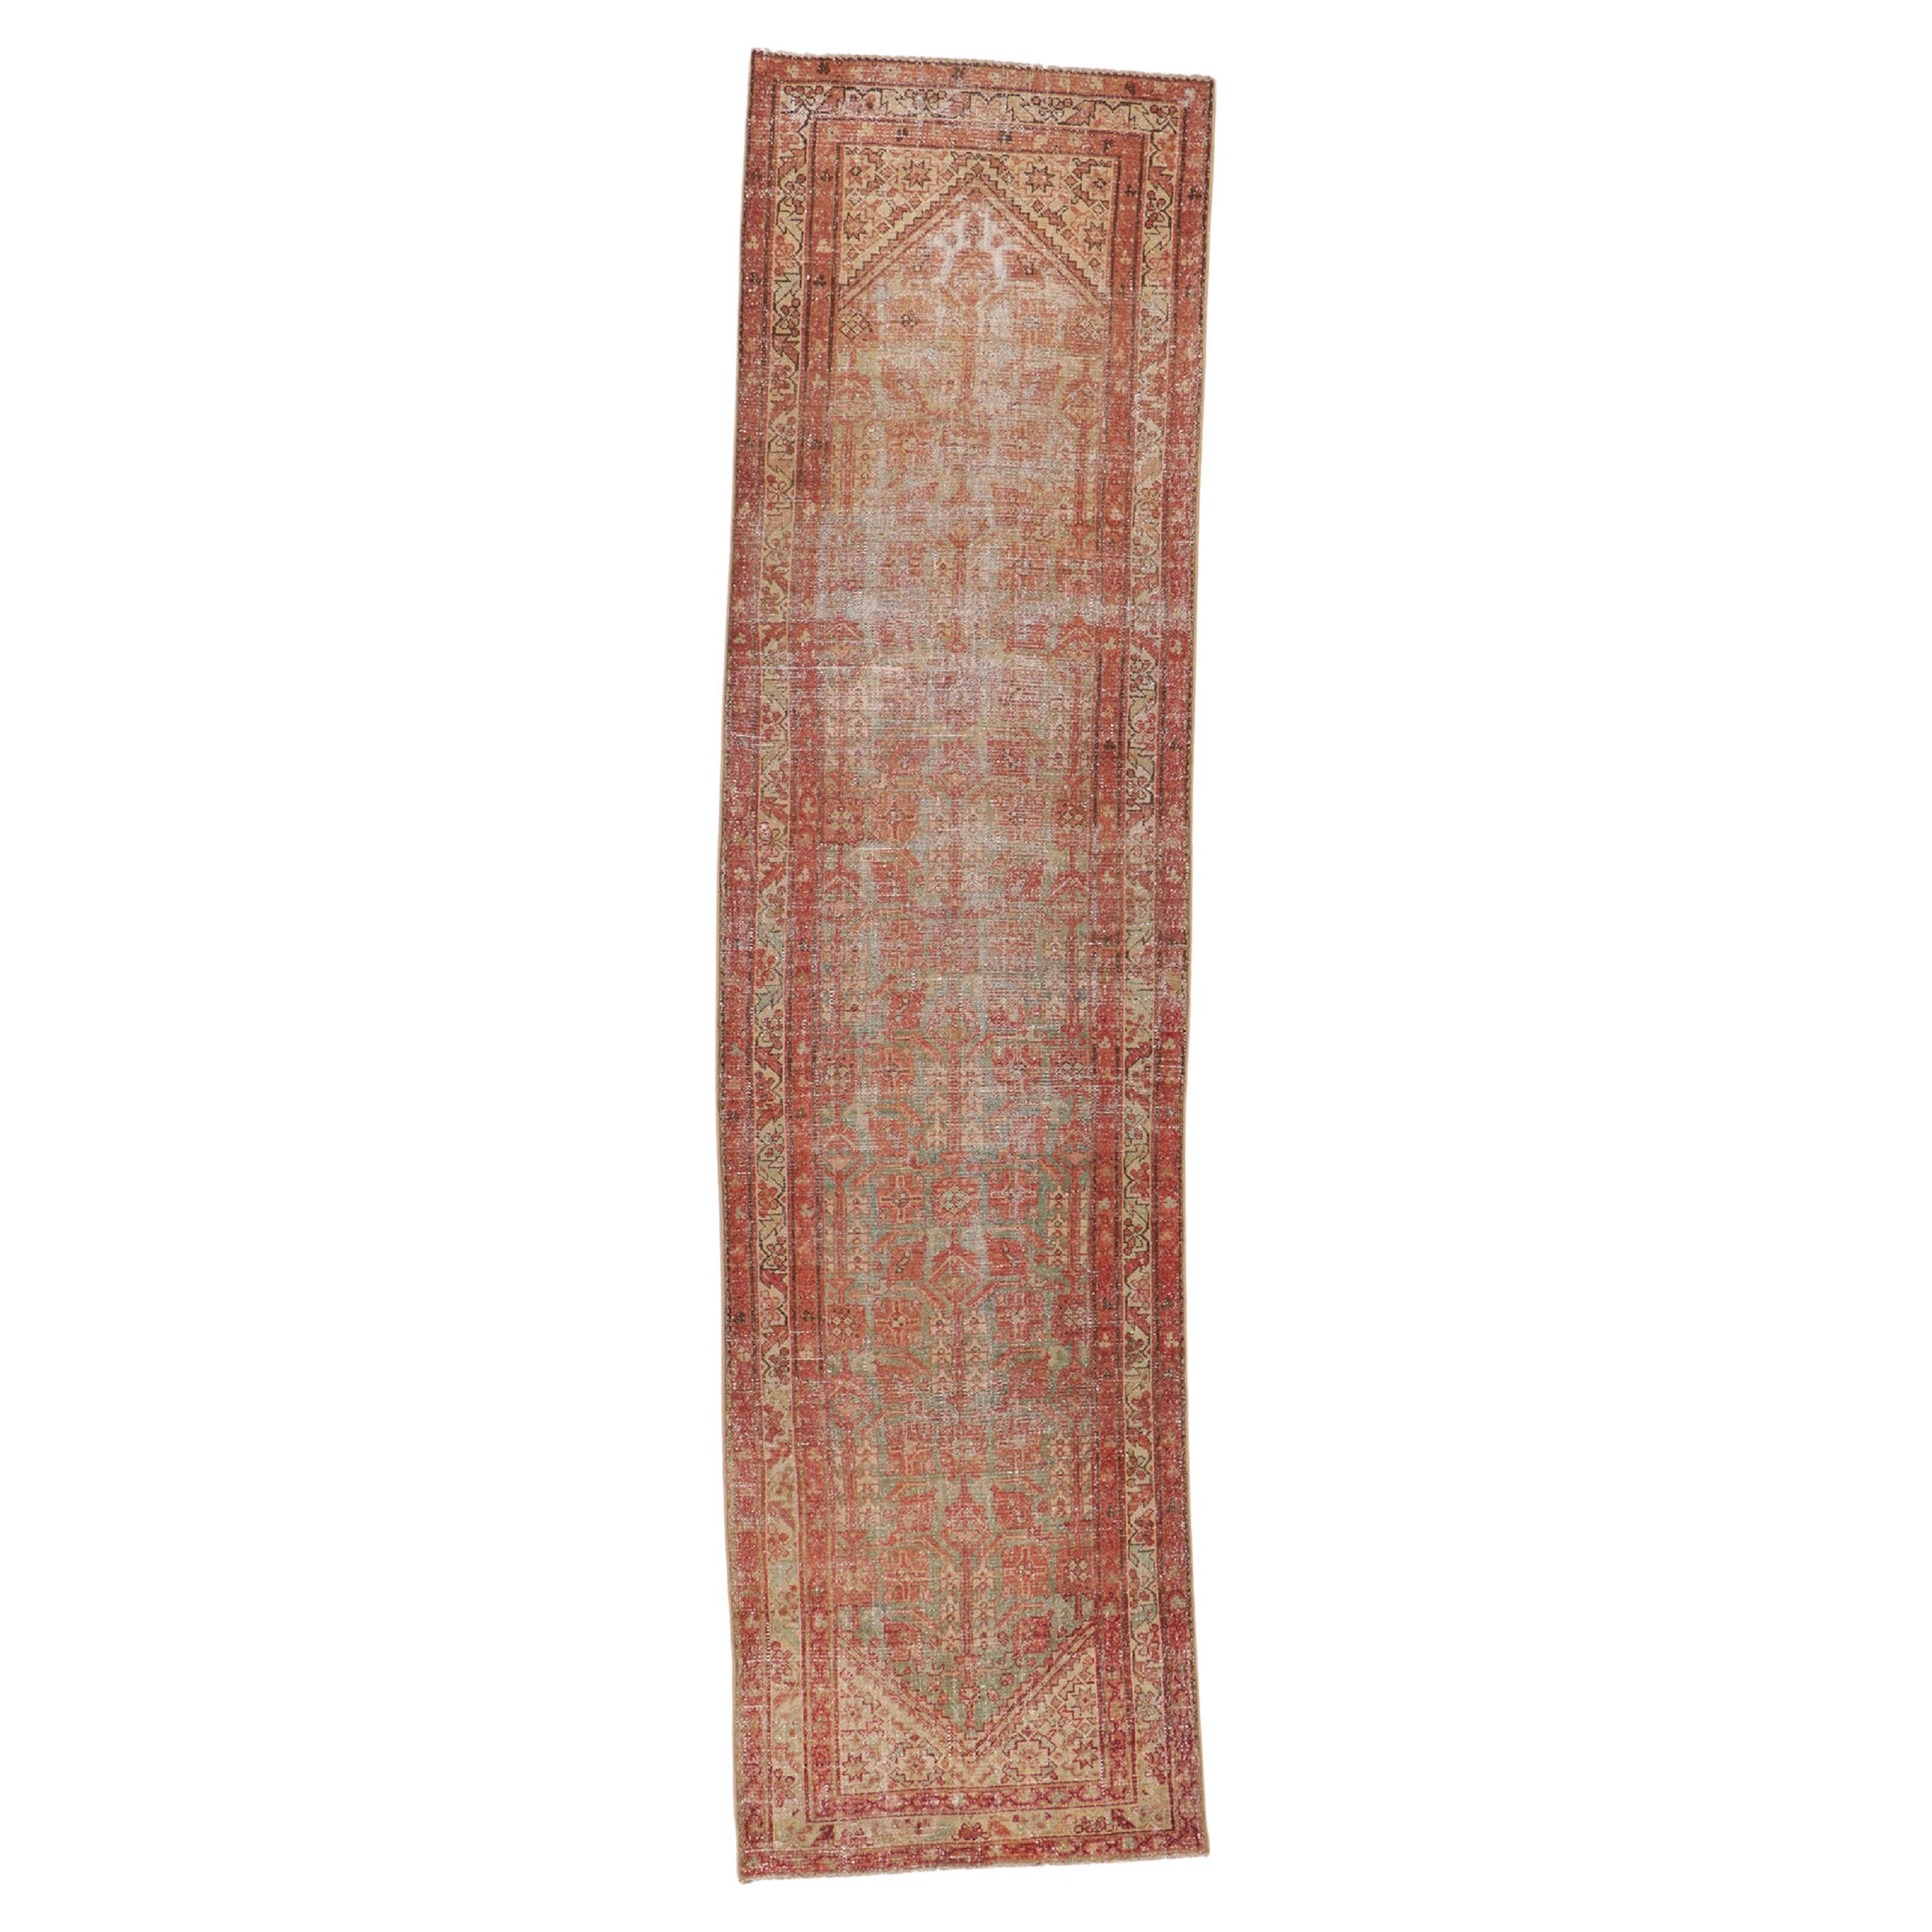 Antique-Worn Persian Malayer Rug, Weathered Finesse Meets Rustic Sensibility